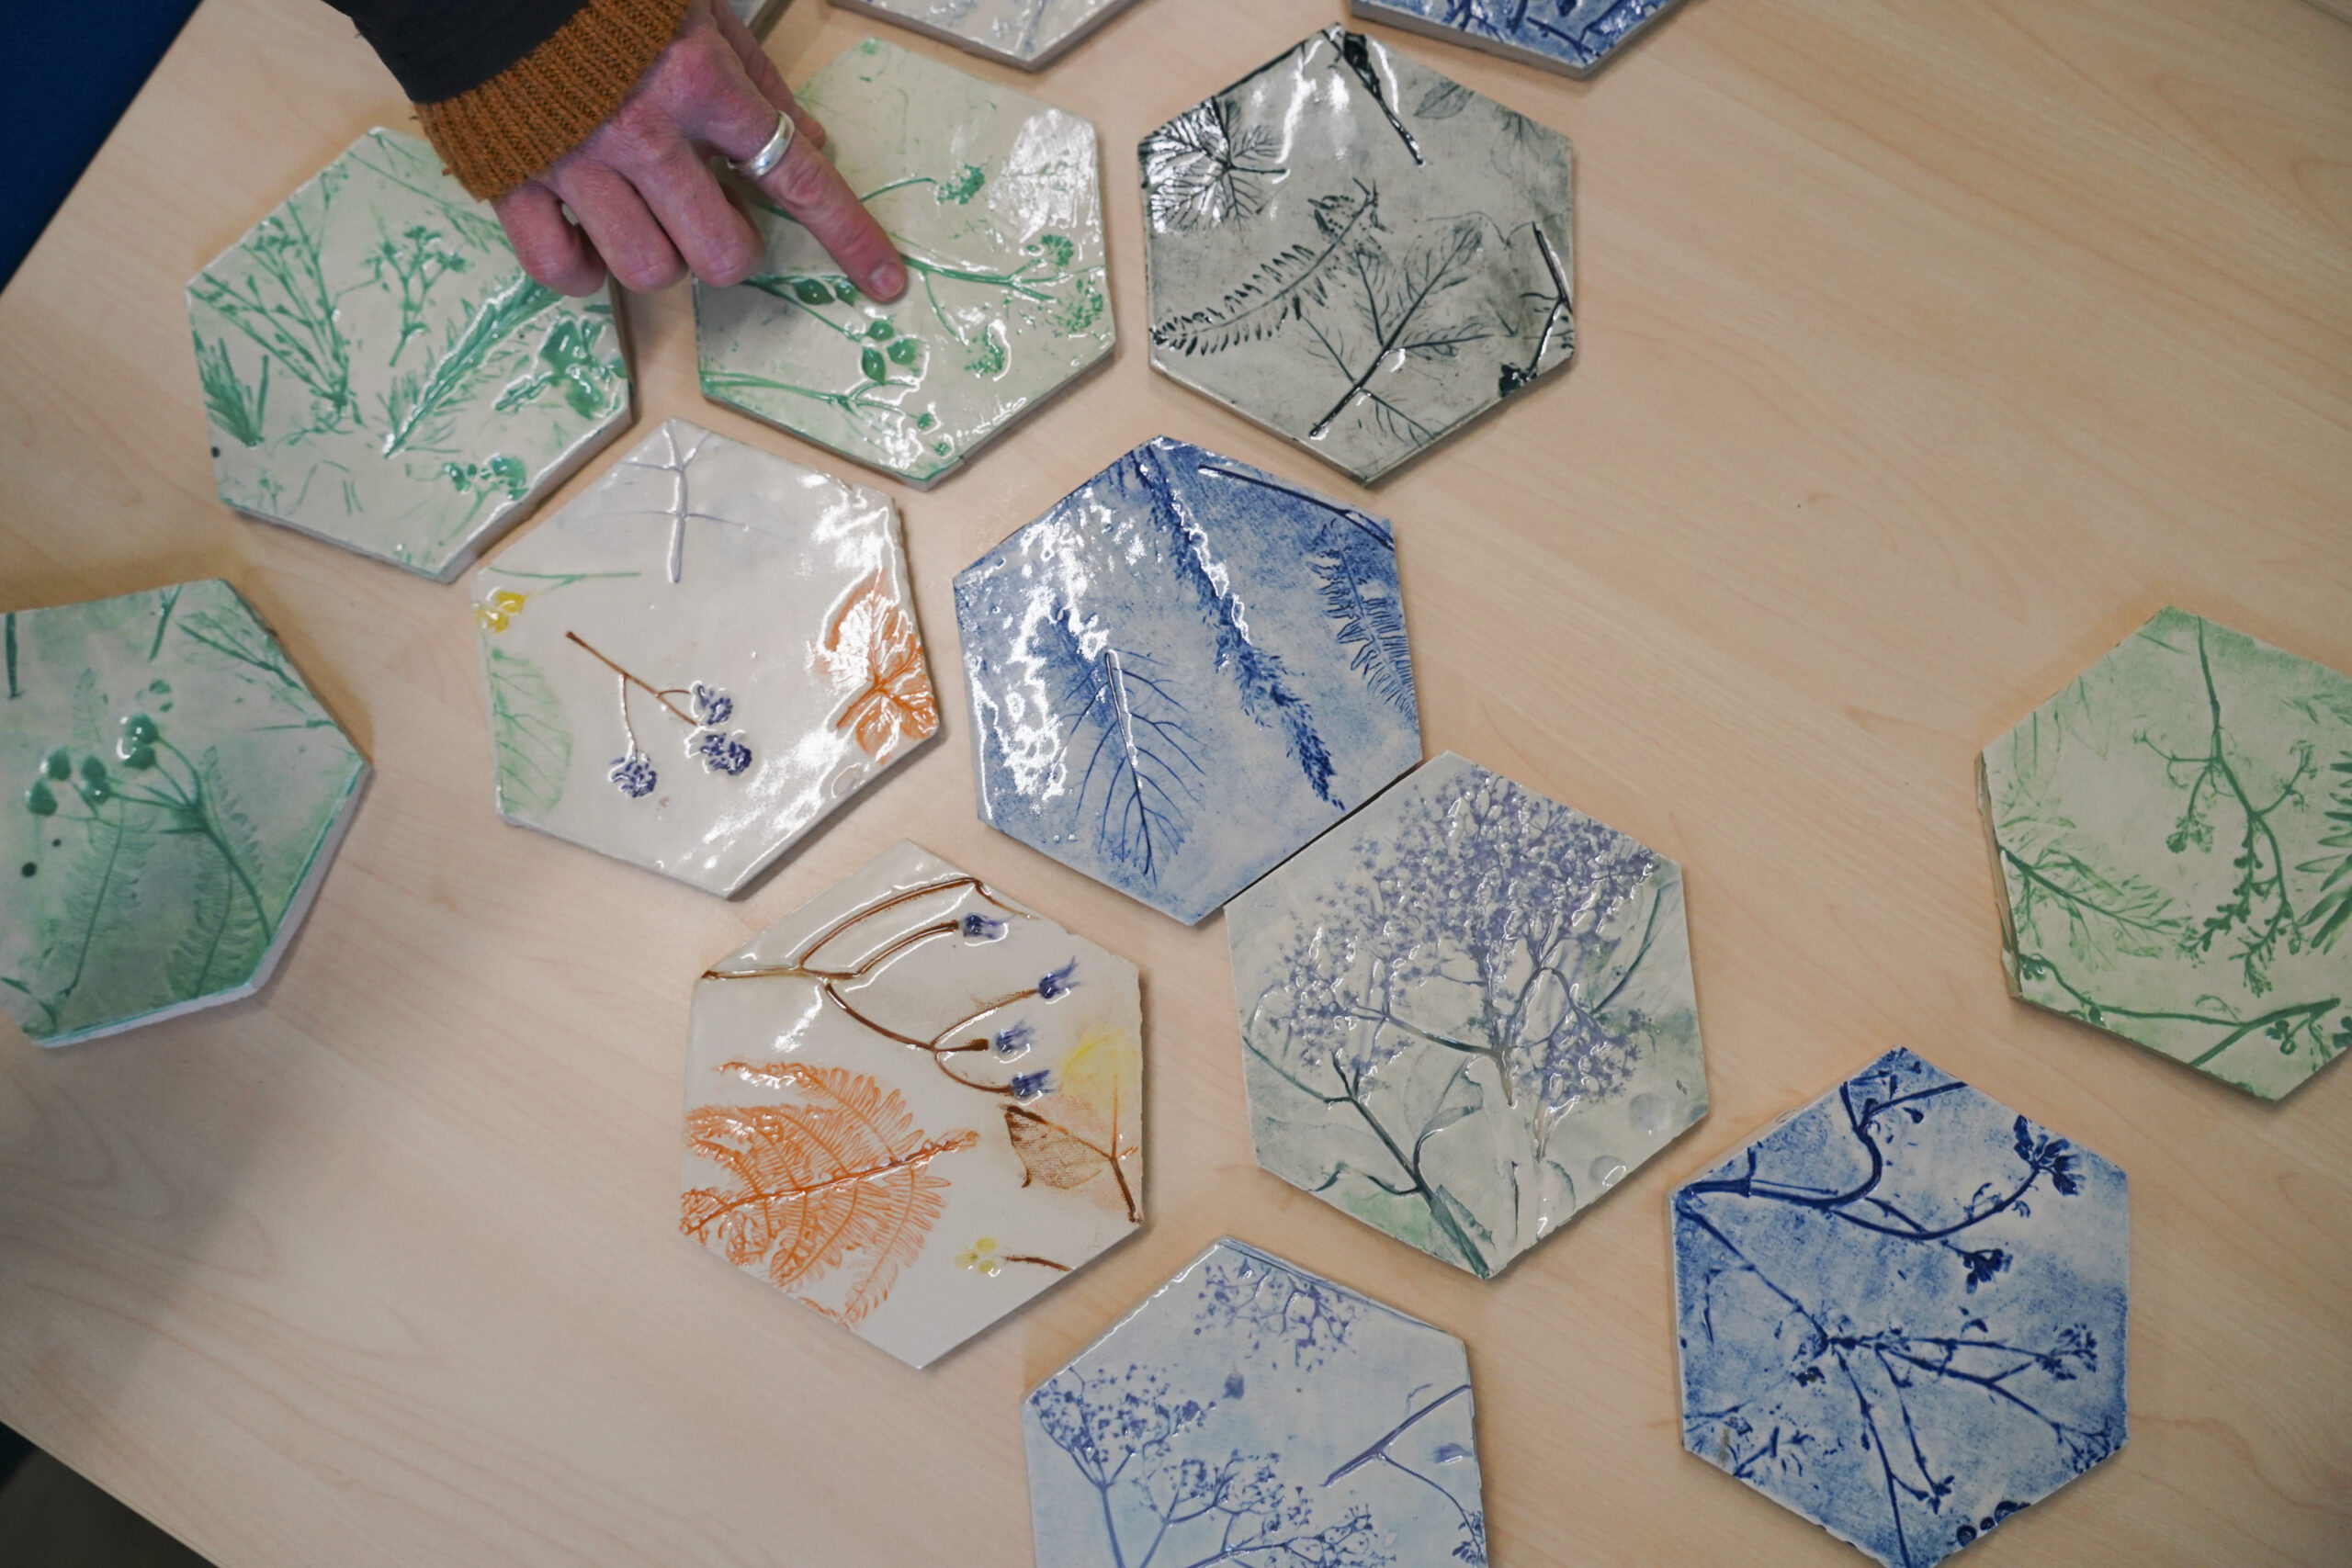 Tiles made by local families to decorate Nansledan's new nursery